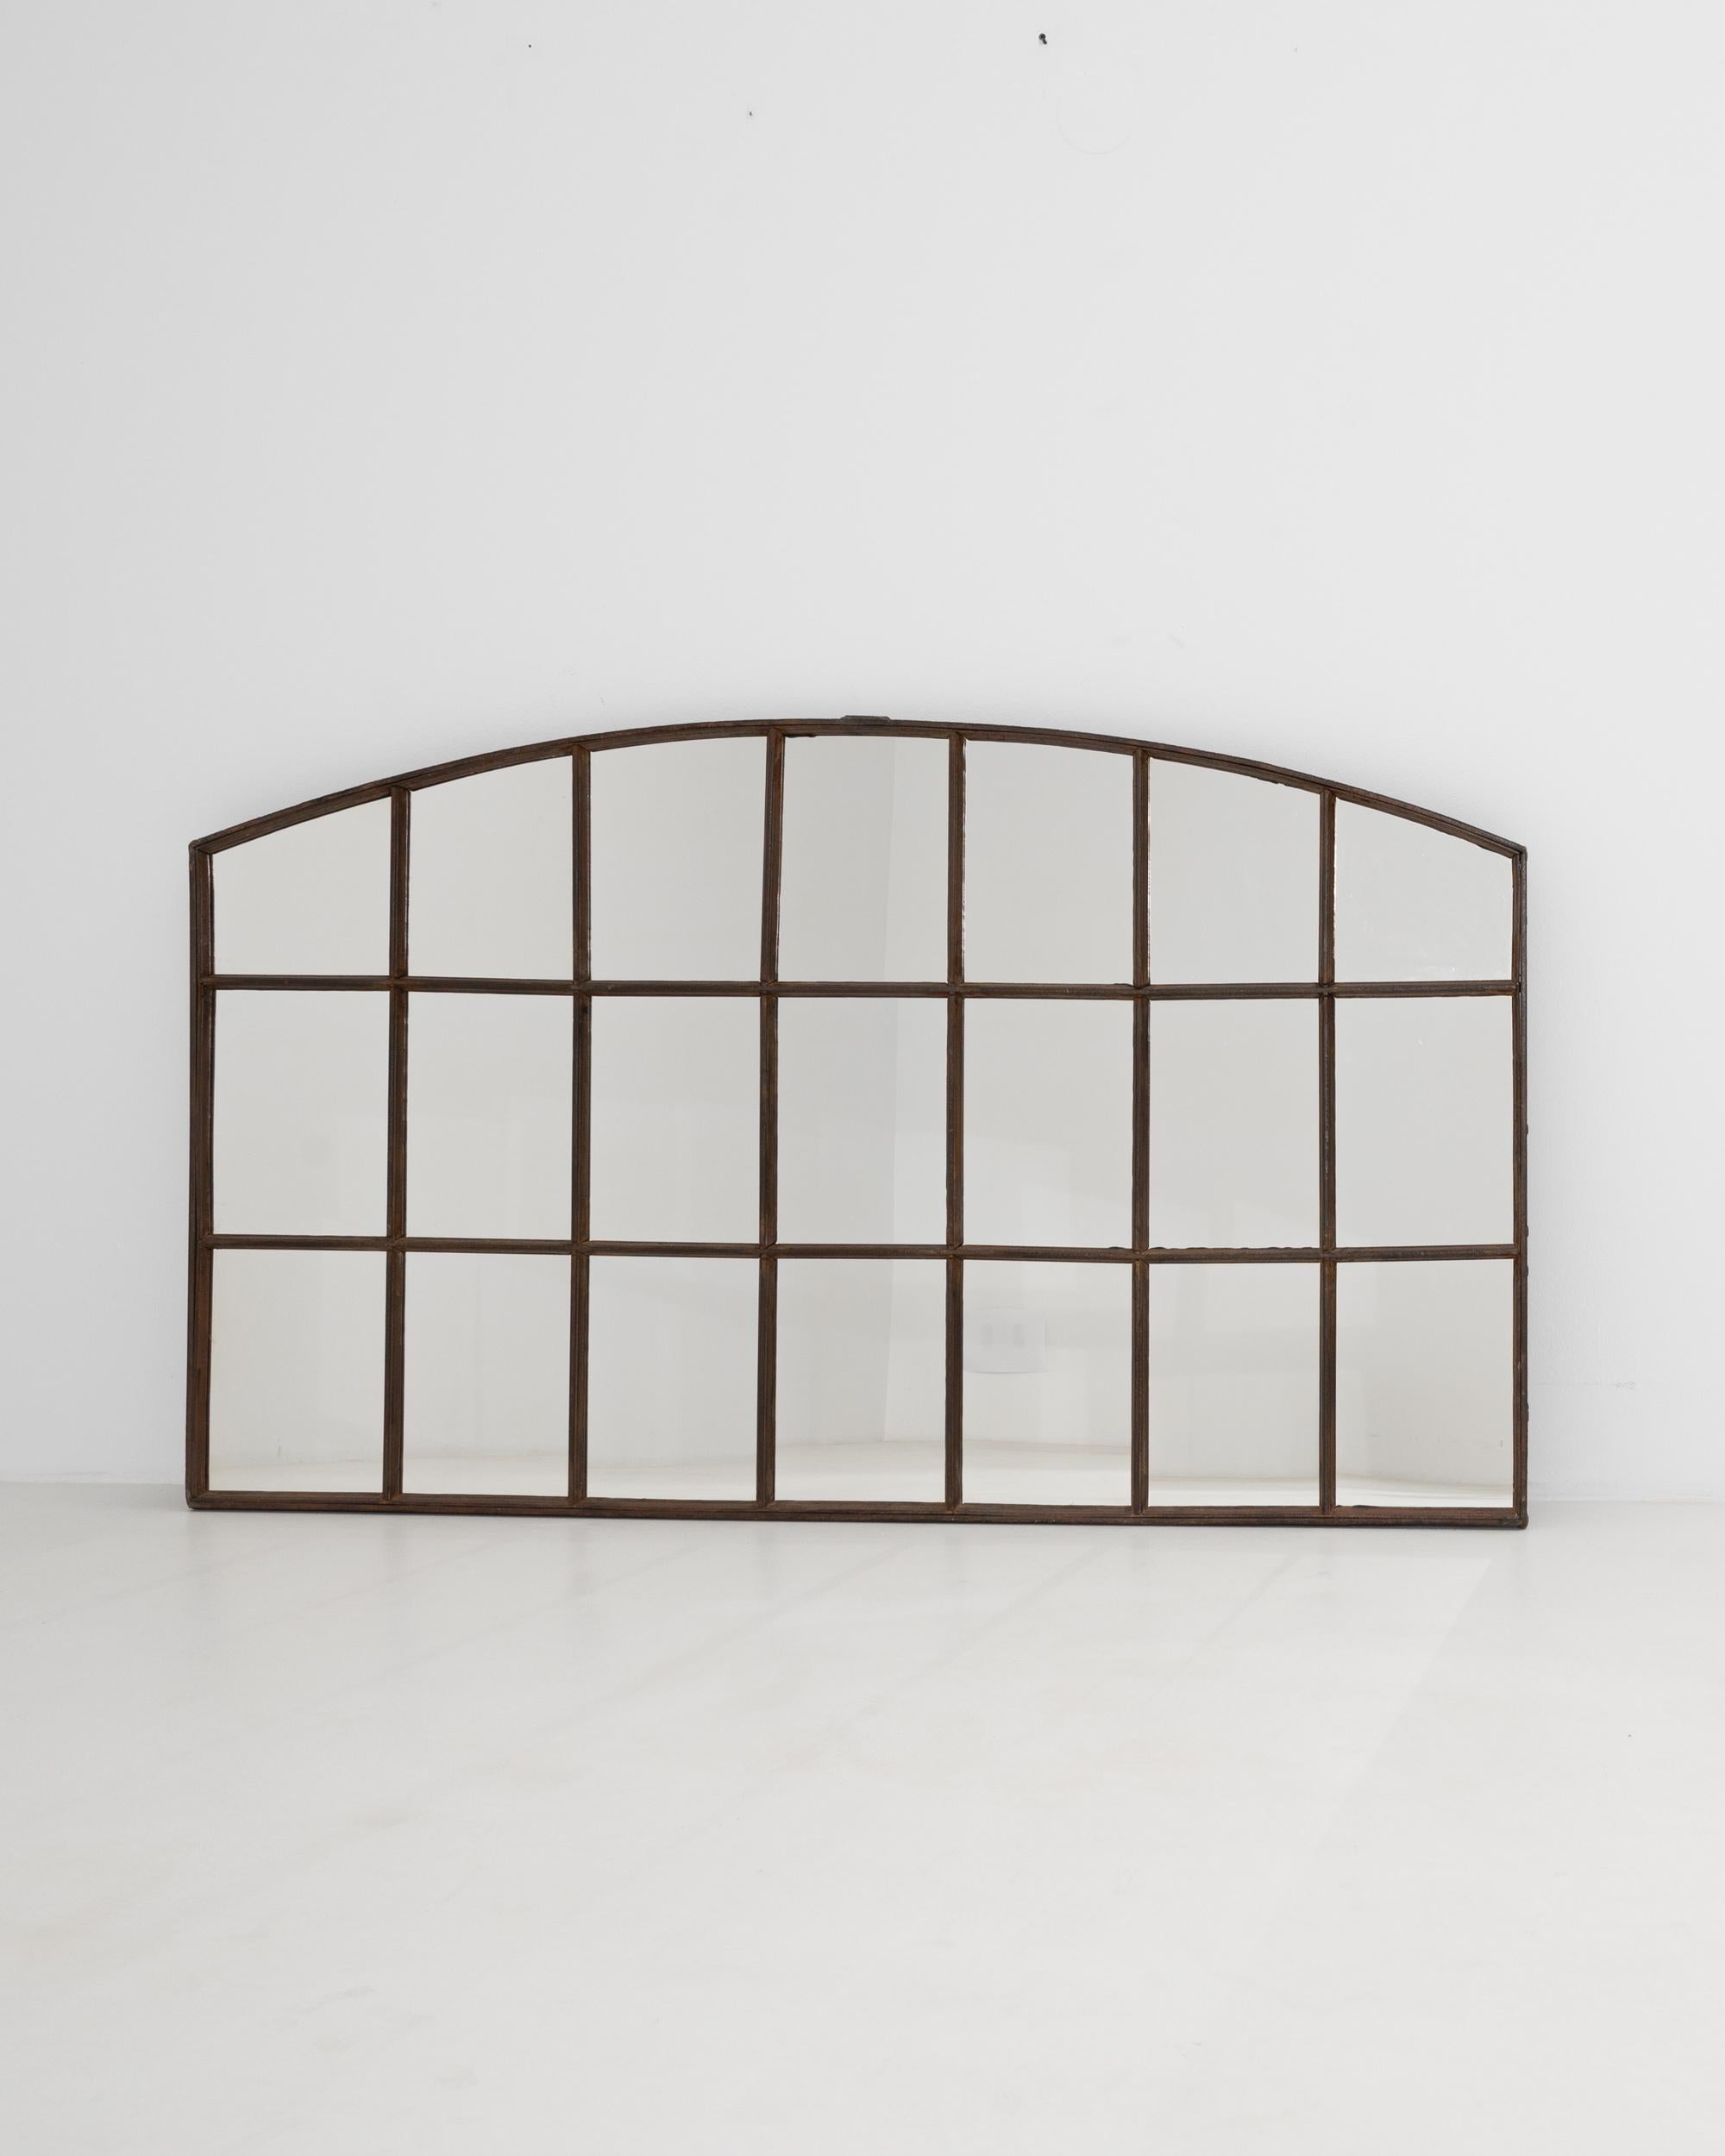 Architectural and striking, this Industrial iron mirror would once have opened the walls of a factory. Made in France in the 20th century, the form evokes a large window; mirrored panes serve to maximize the natural light within a space. The curve